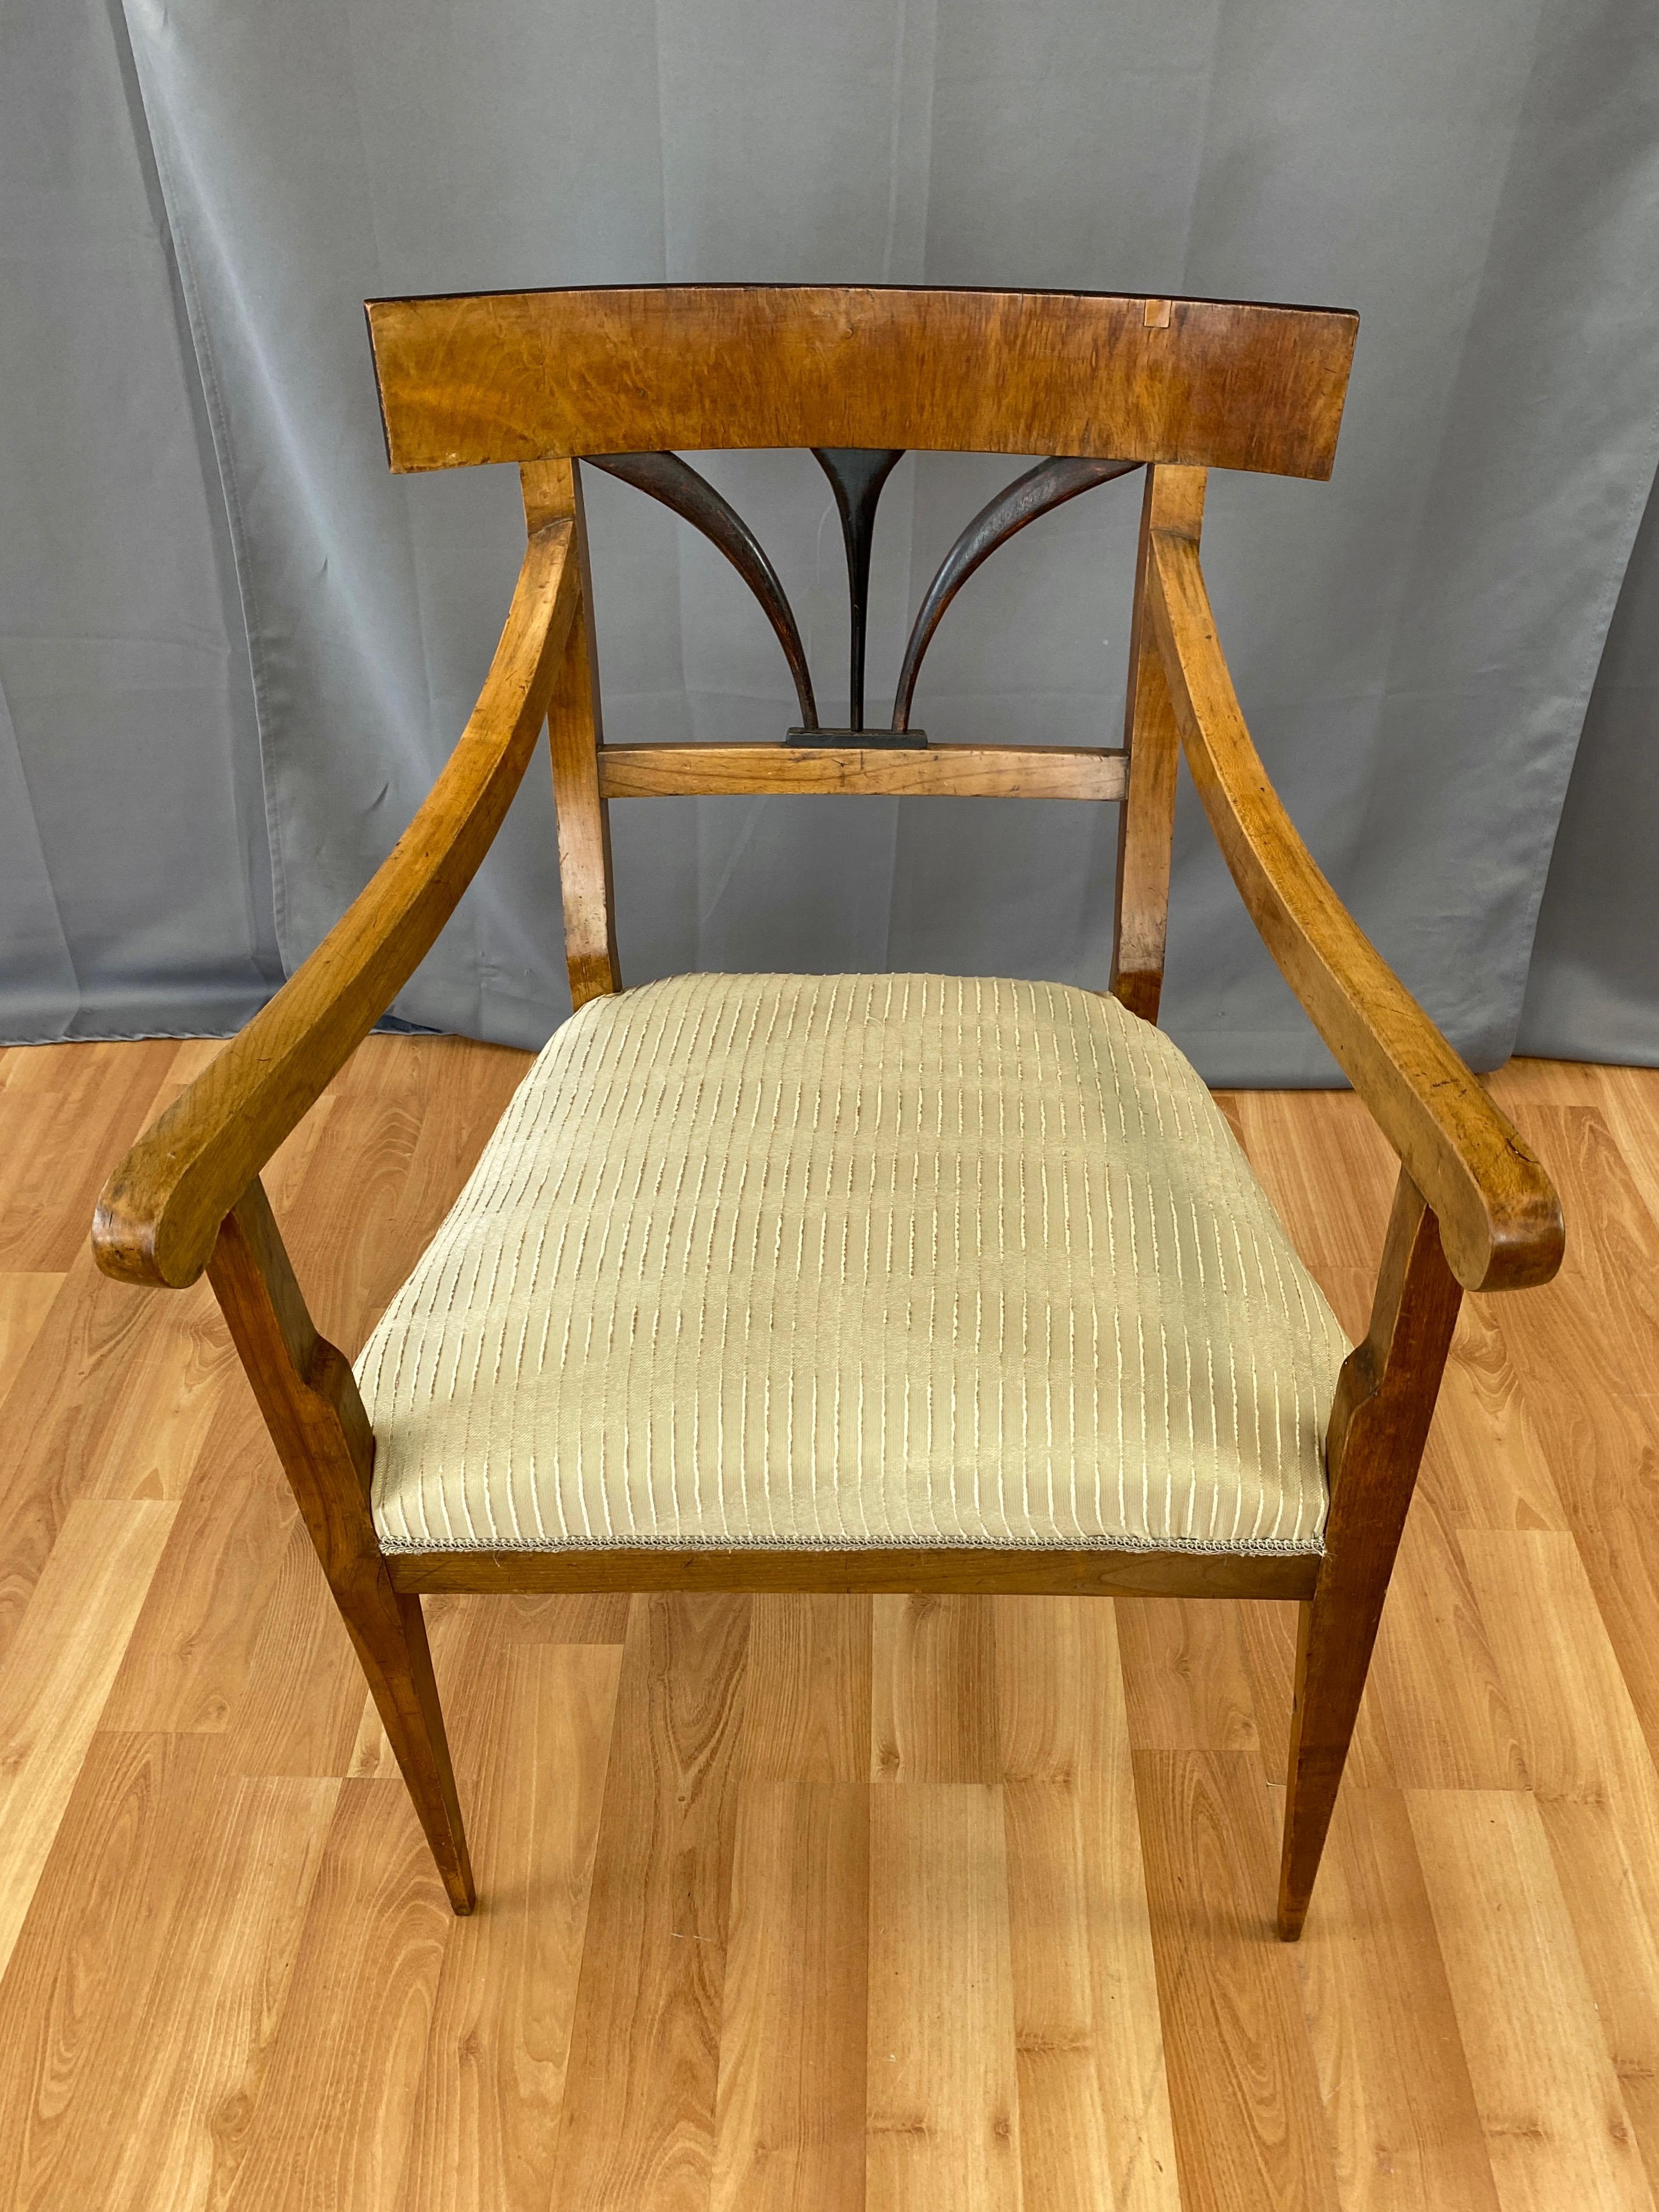 Steel Early Biedermeier Fruitwood and Ash Armchair with Upholstered Seat, c. 1825